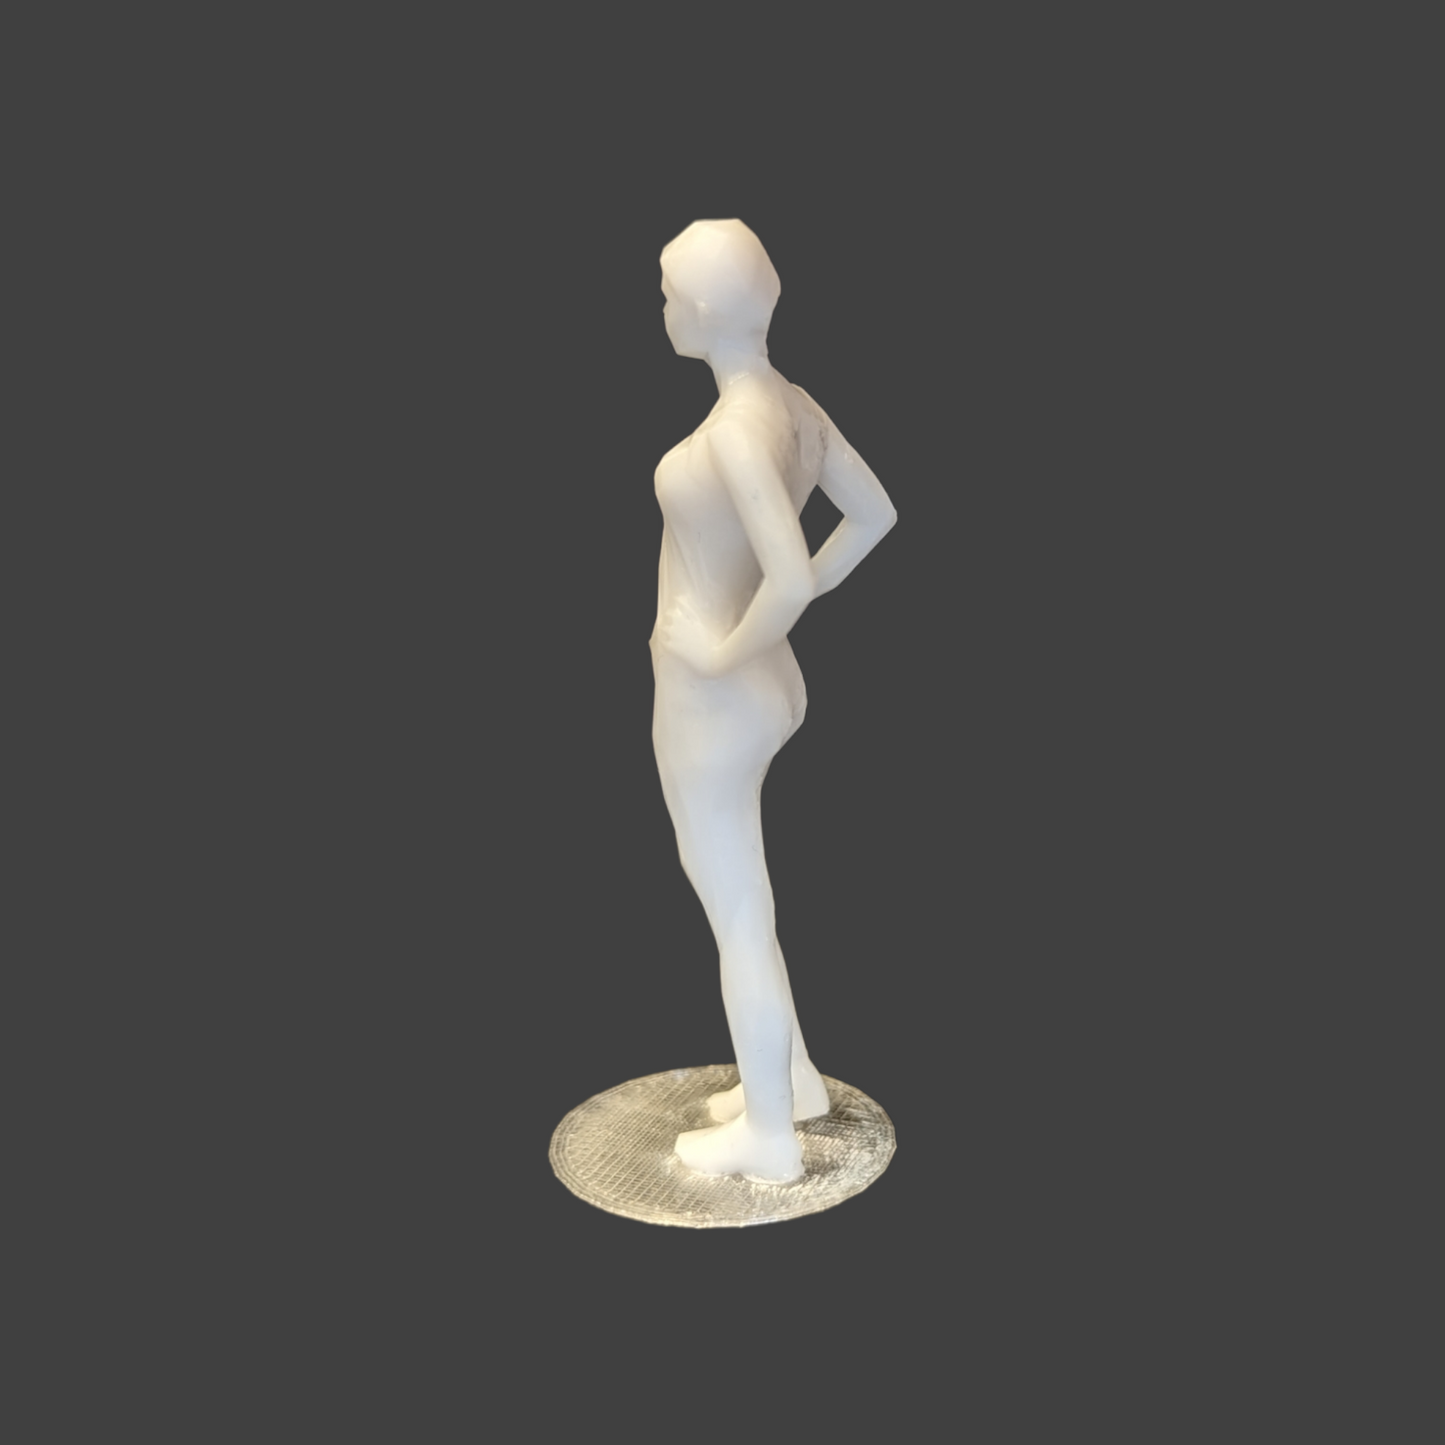 Scale Model Box Unpainted Figure of Woman Standing in Sports Clothing Stretching